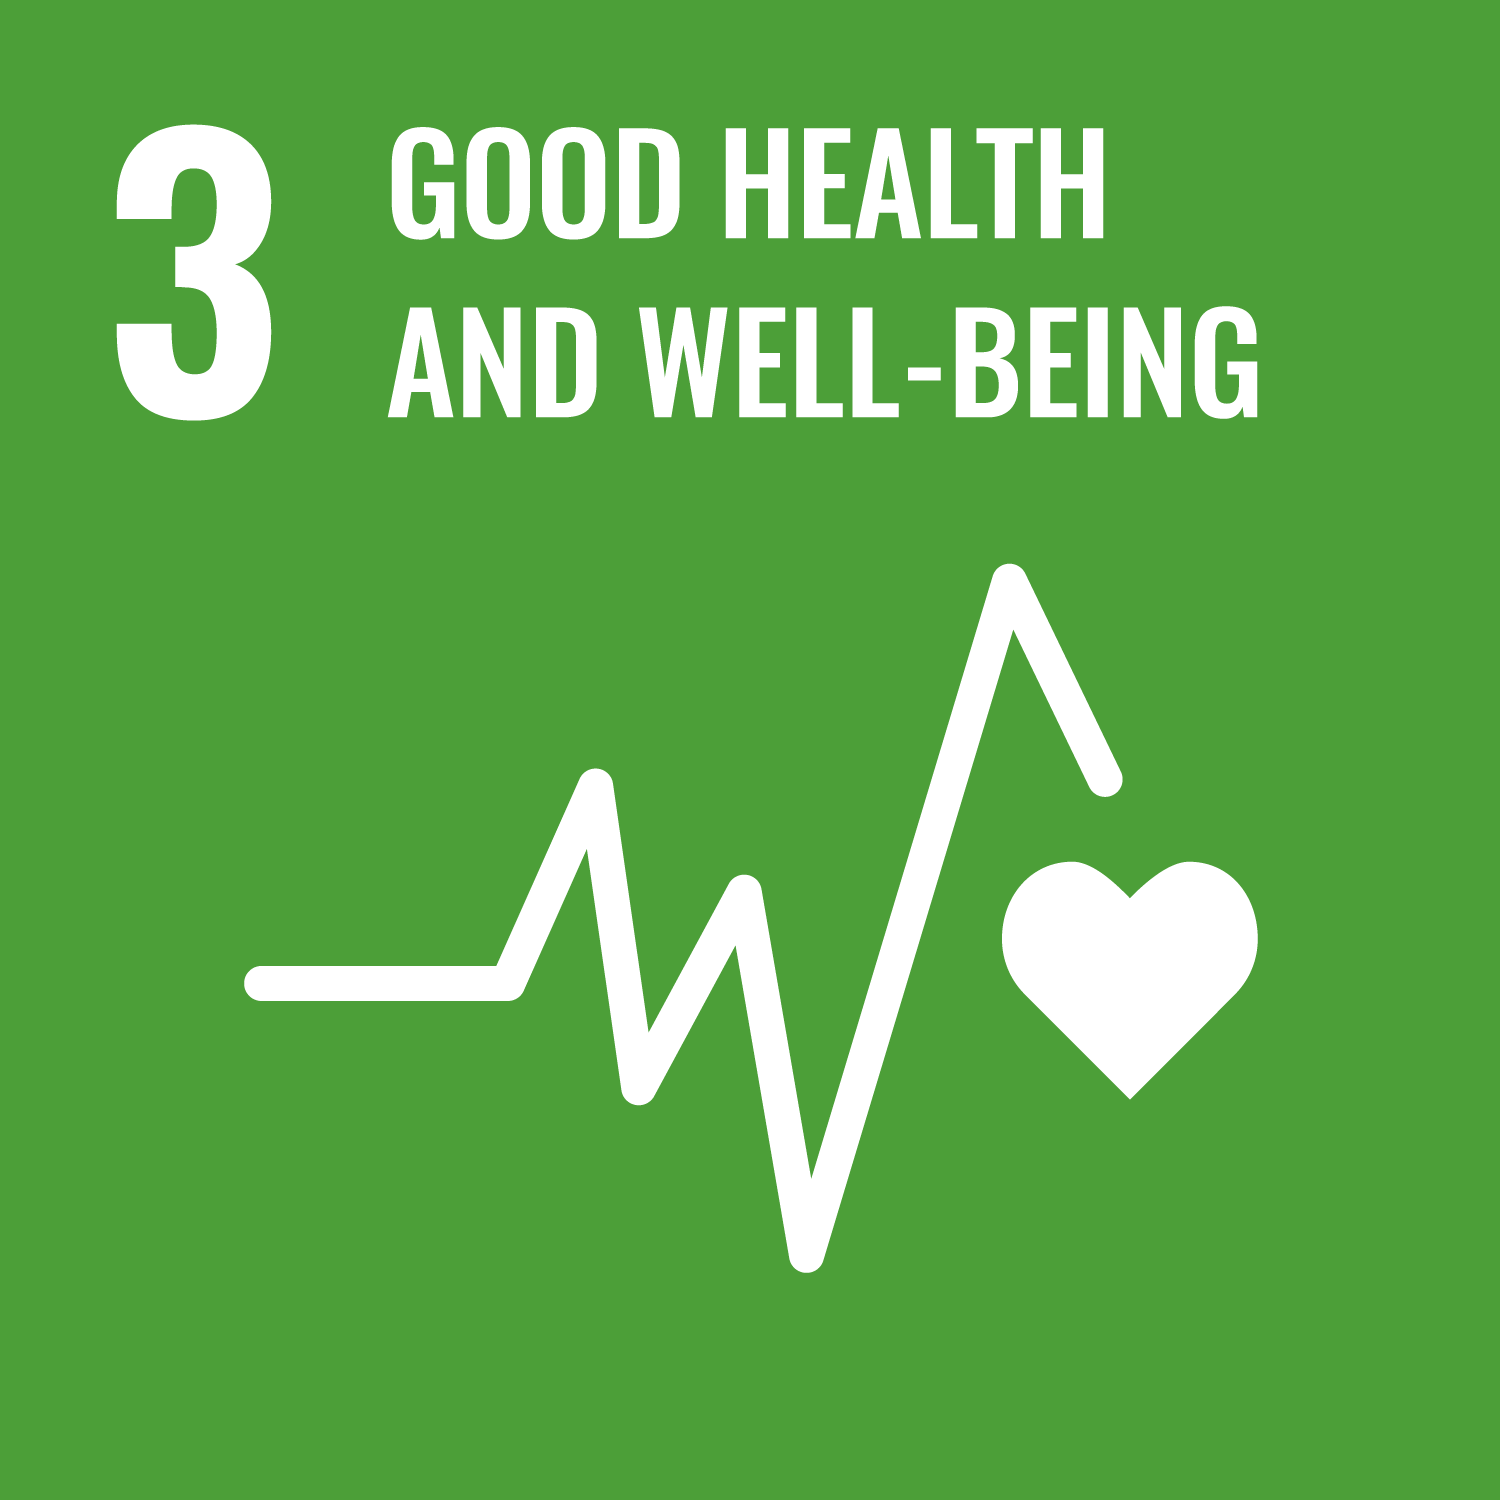 sdgs we are targeting with our healthcare hygiene activities.